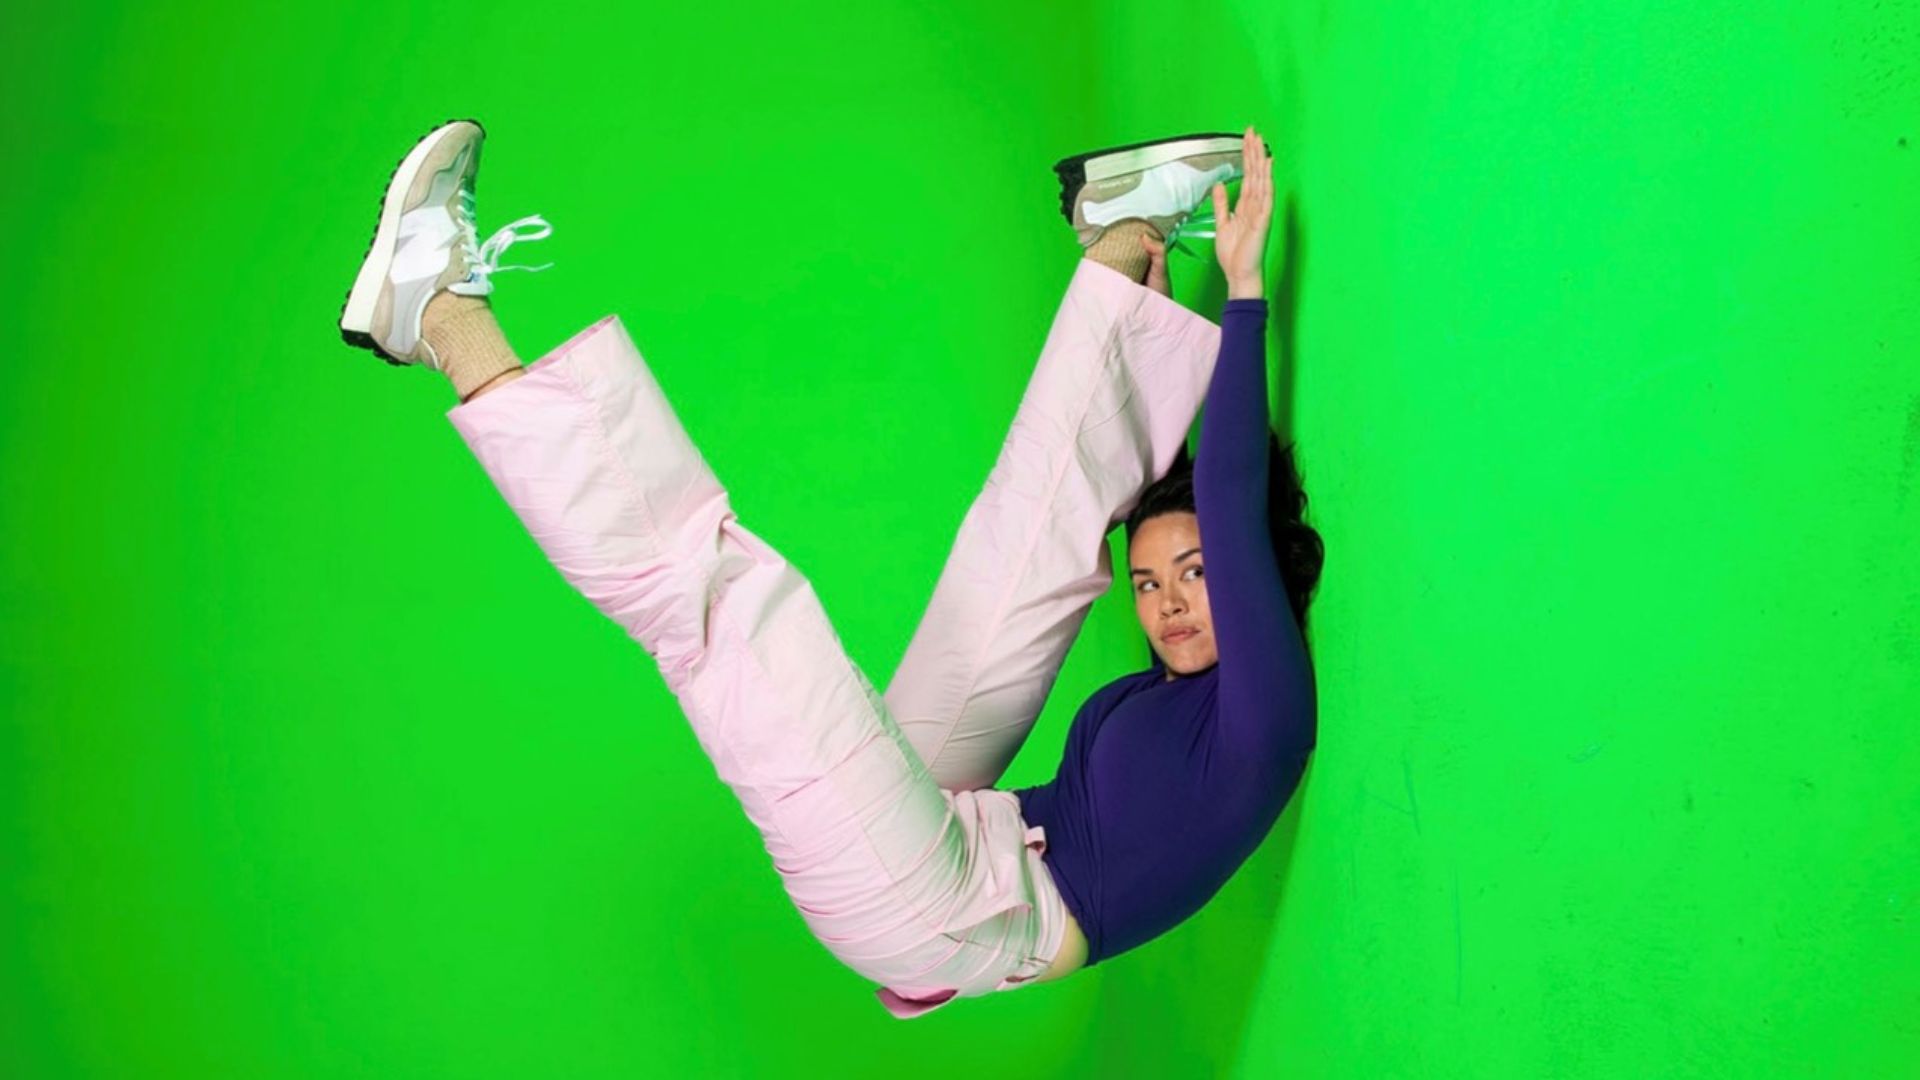 A dancer folds in half on a green background.